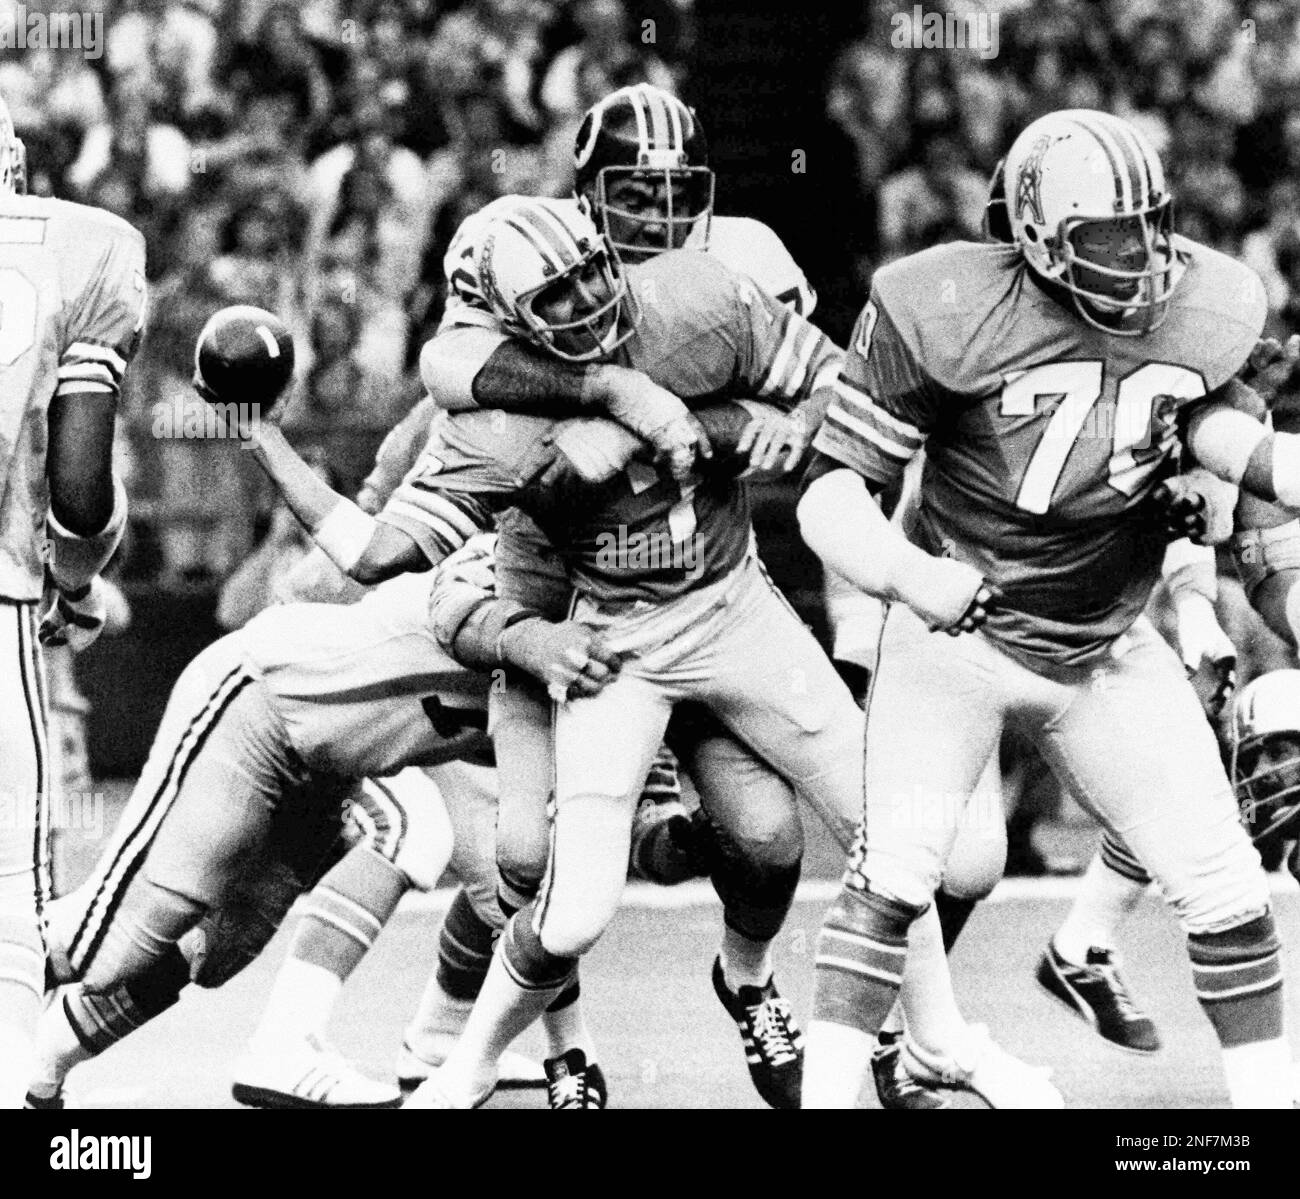 Houston Oiler quarterback Dan Pastorini (7) is sacked from the blind side  by Washington Redskin defensive tackle Diron Talbert (72) in the second  quarter of the game, Sunday, Oct. 19, 1975, Houston,